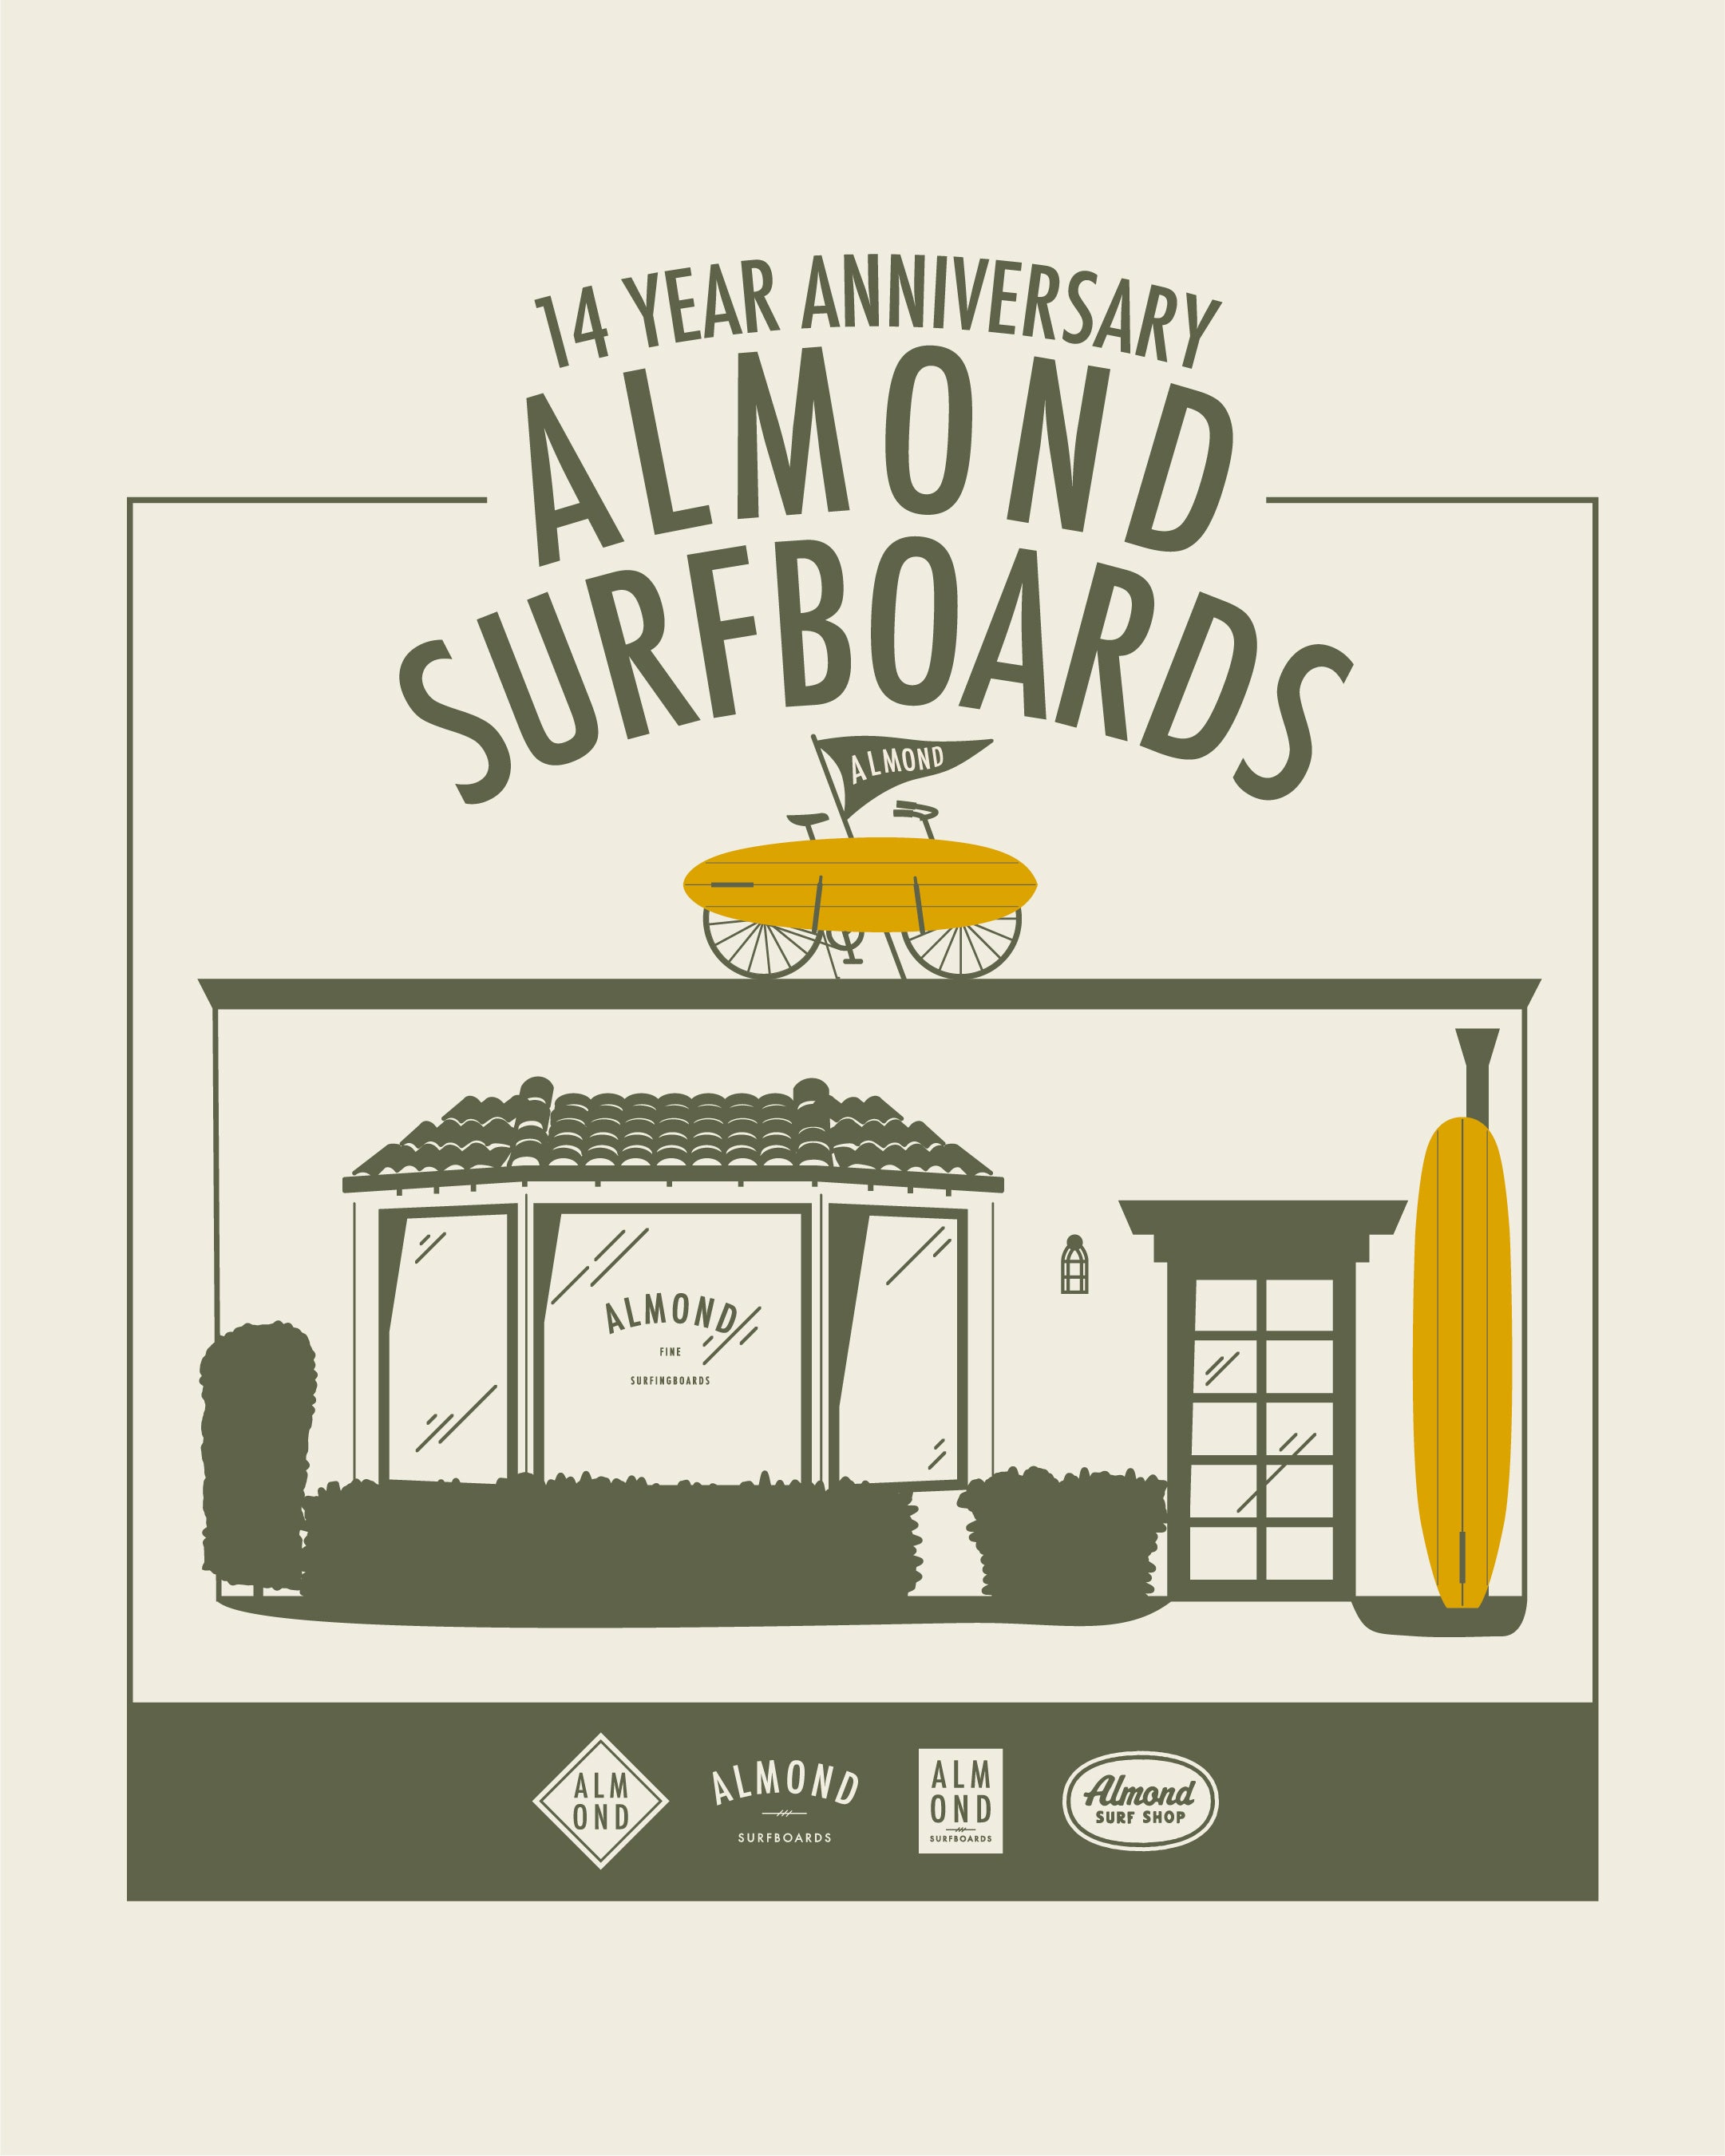 Almond Surf Shop is 14 Today!